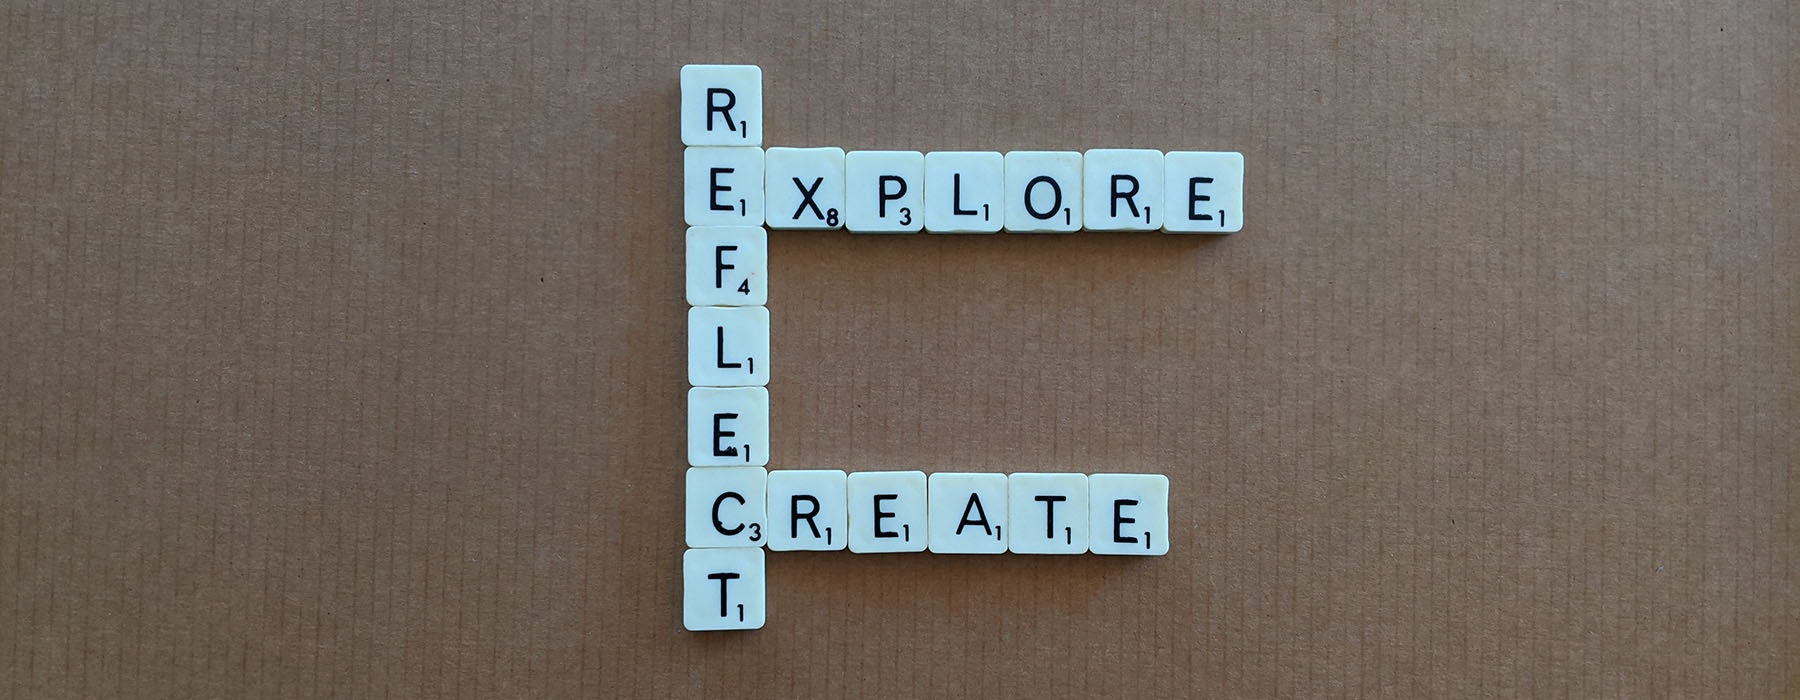 Scrabble letters spell out and join together the words Explore, Reflect, and Create